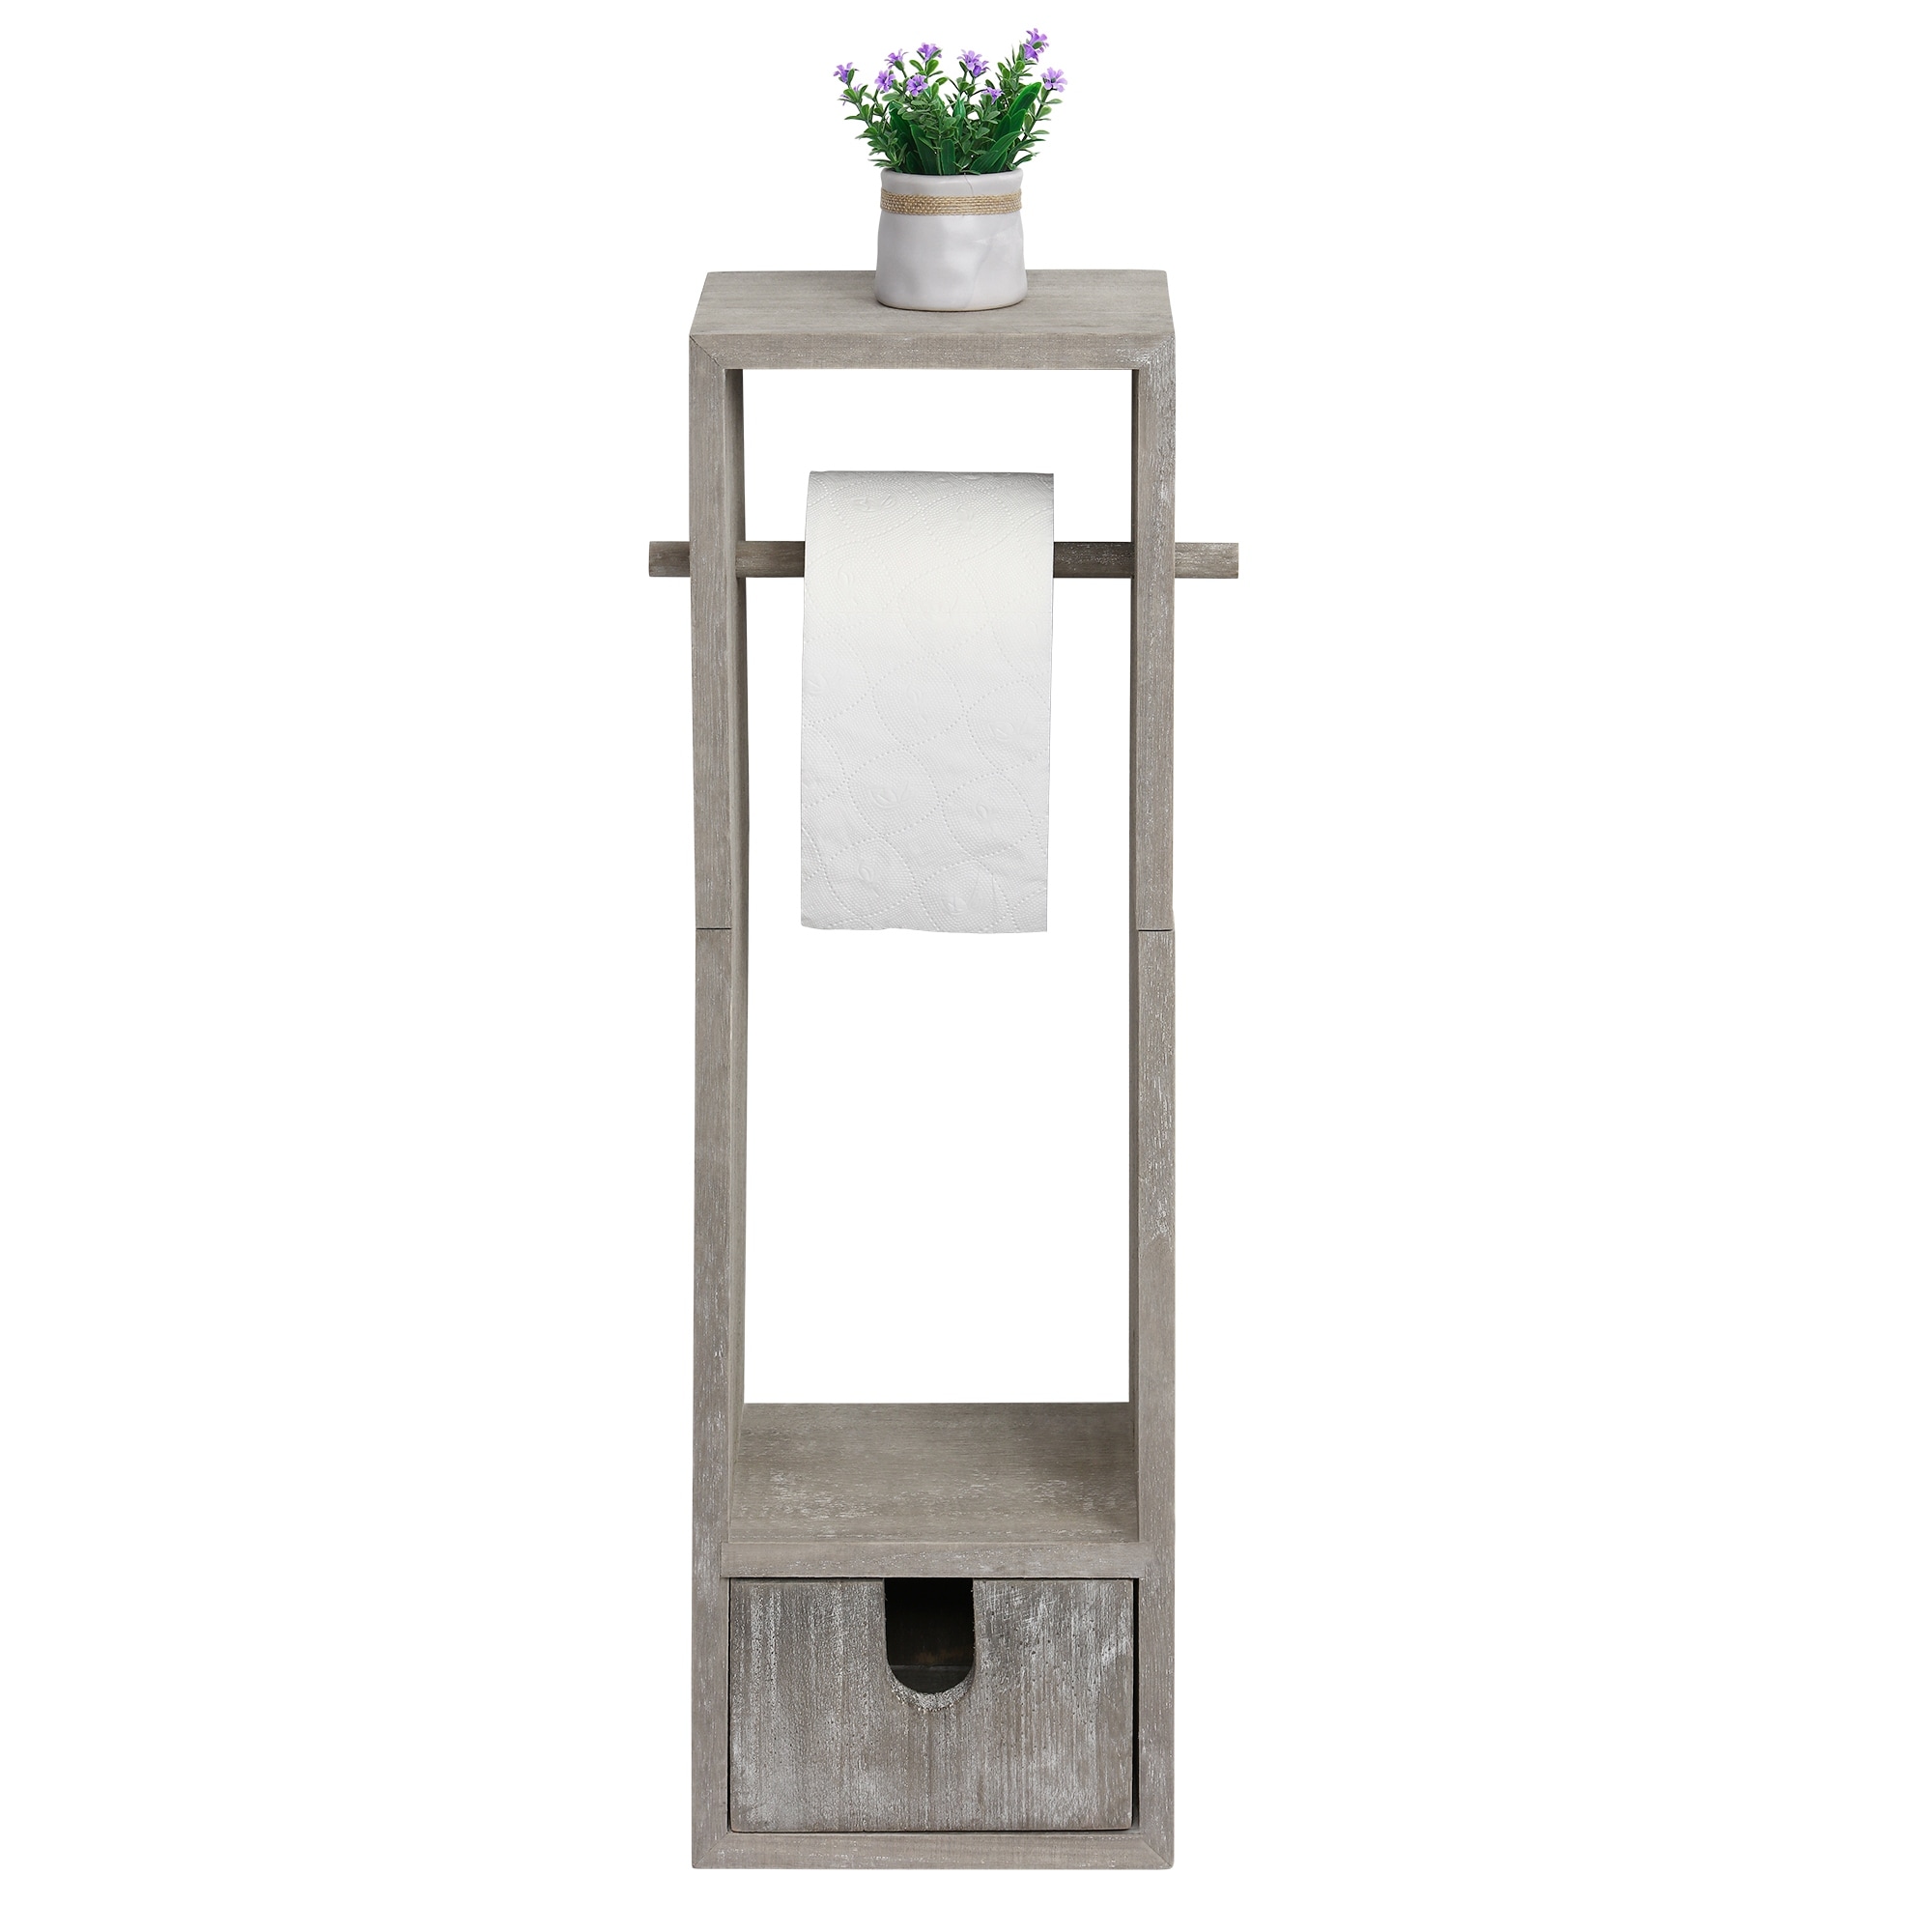 https://ak1.ostkcdn.com/images/products/is/images/direct/6e140085db80affed136131cae40132a18d81916/Wood-Free-Standing-Toilet-Paper-Roll-Holder-with-Drawer.jpg